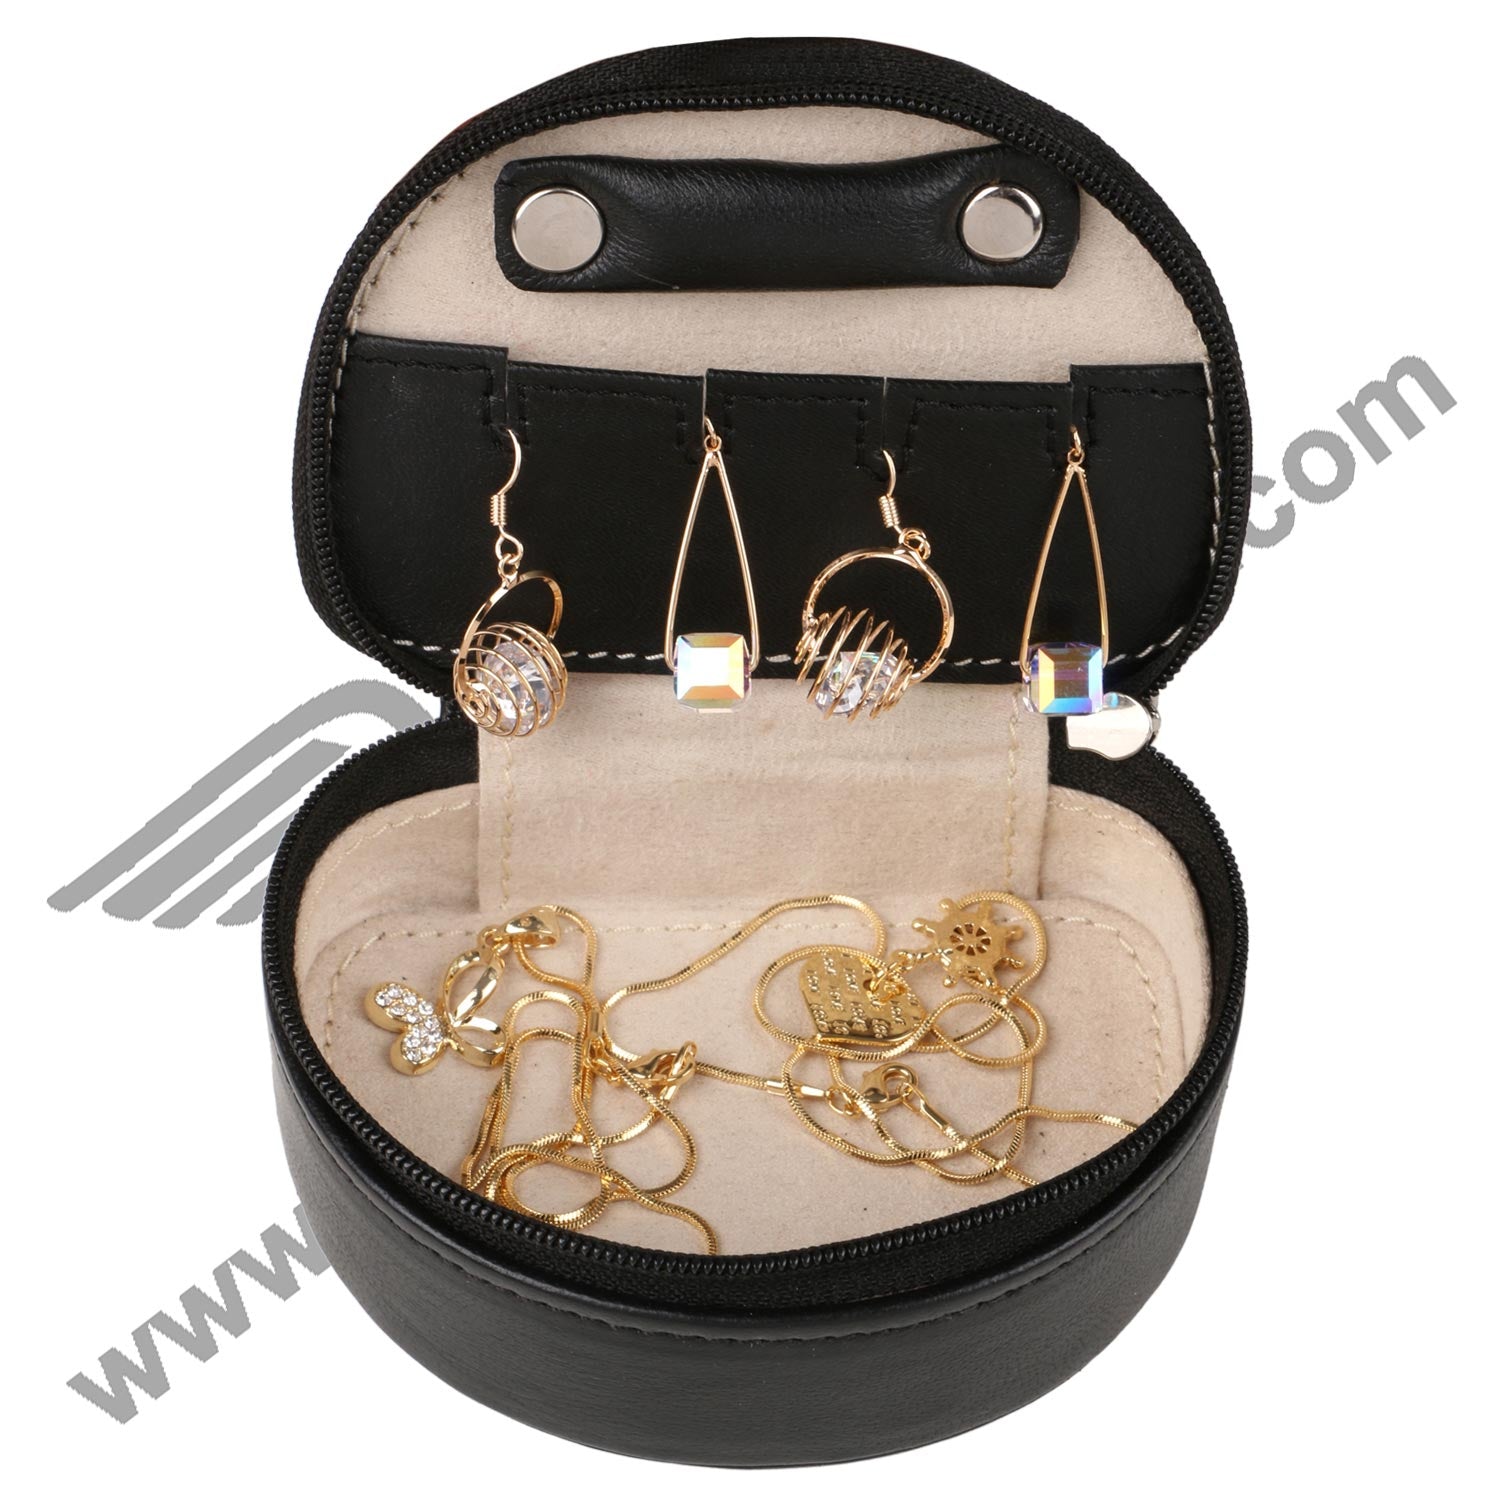 Open image of TRAVEL SMALL JEWELERY CASE. The lid is open and it depicts storage area both for ear rings and necklace